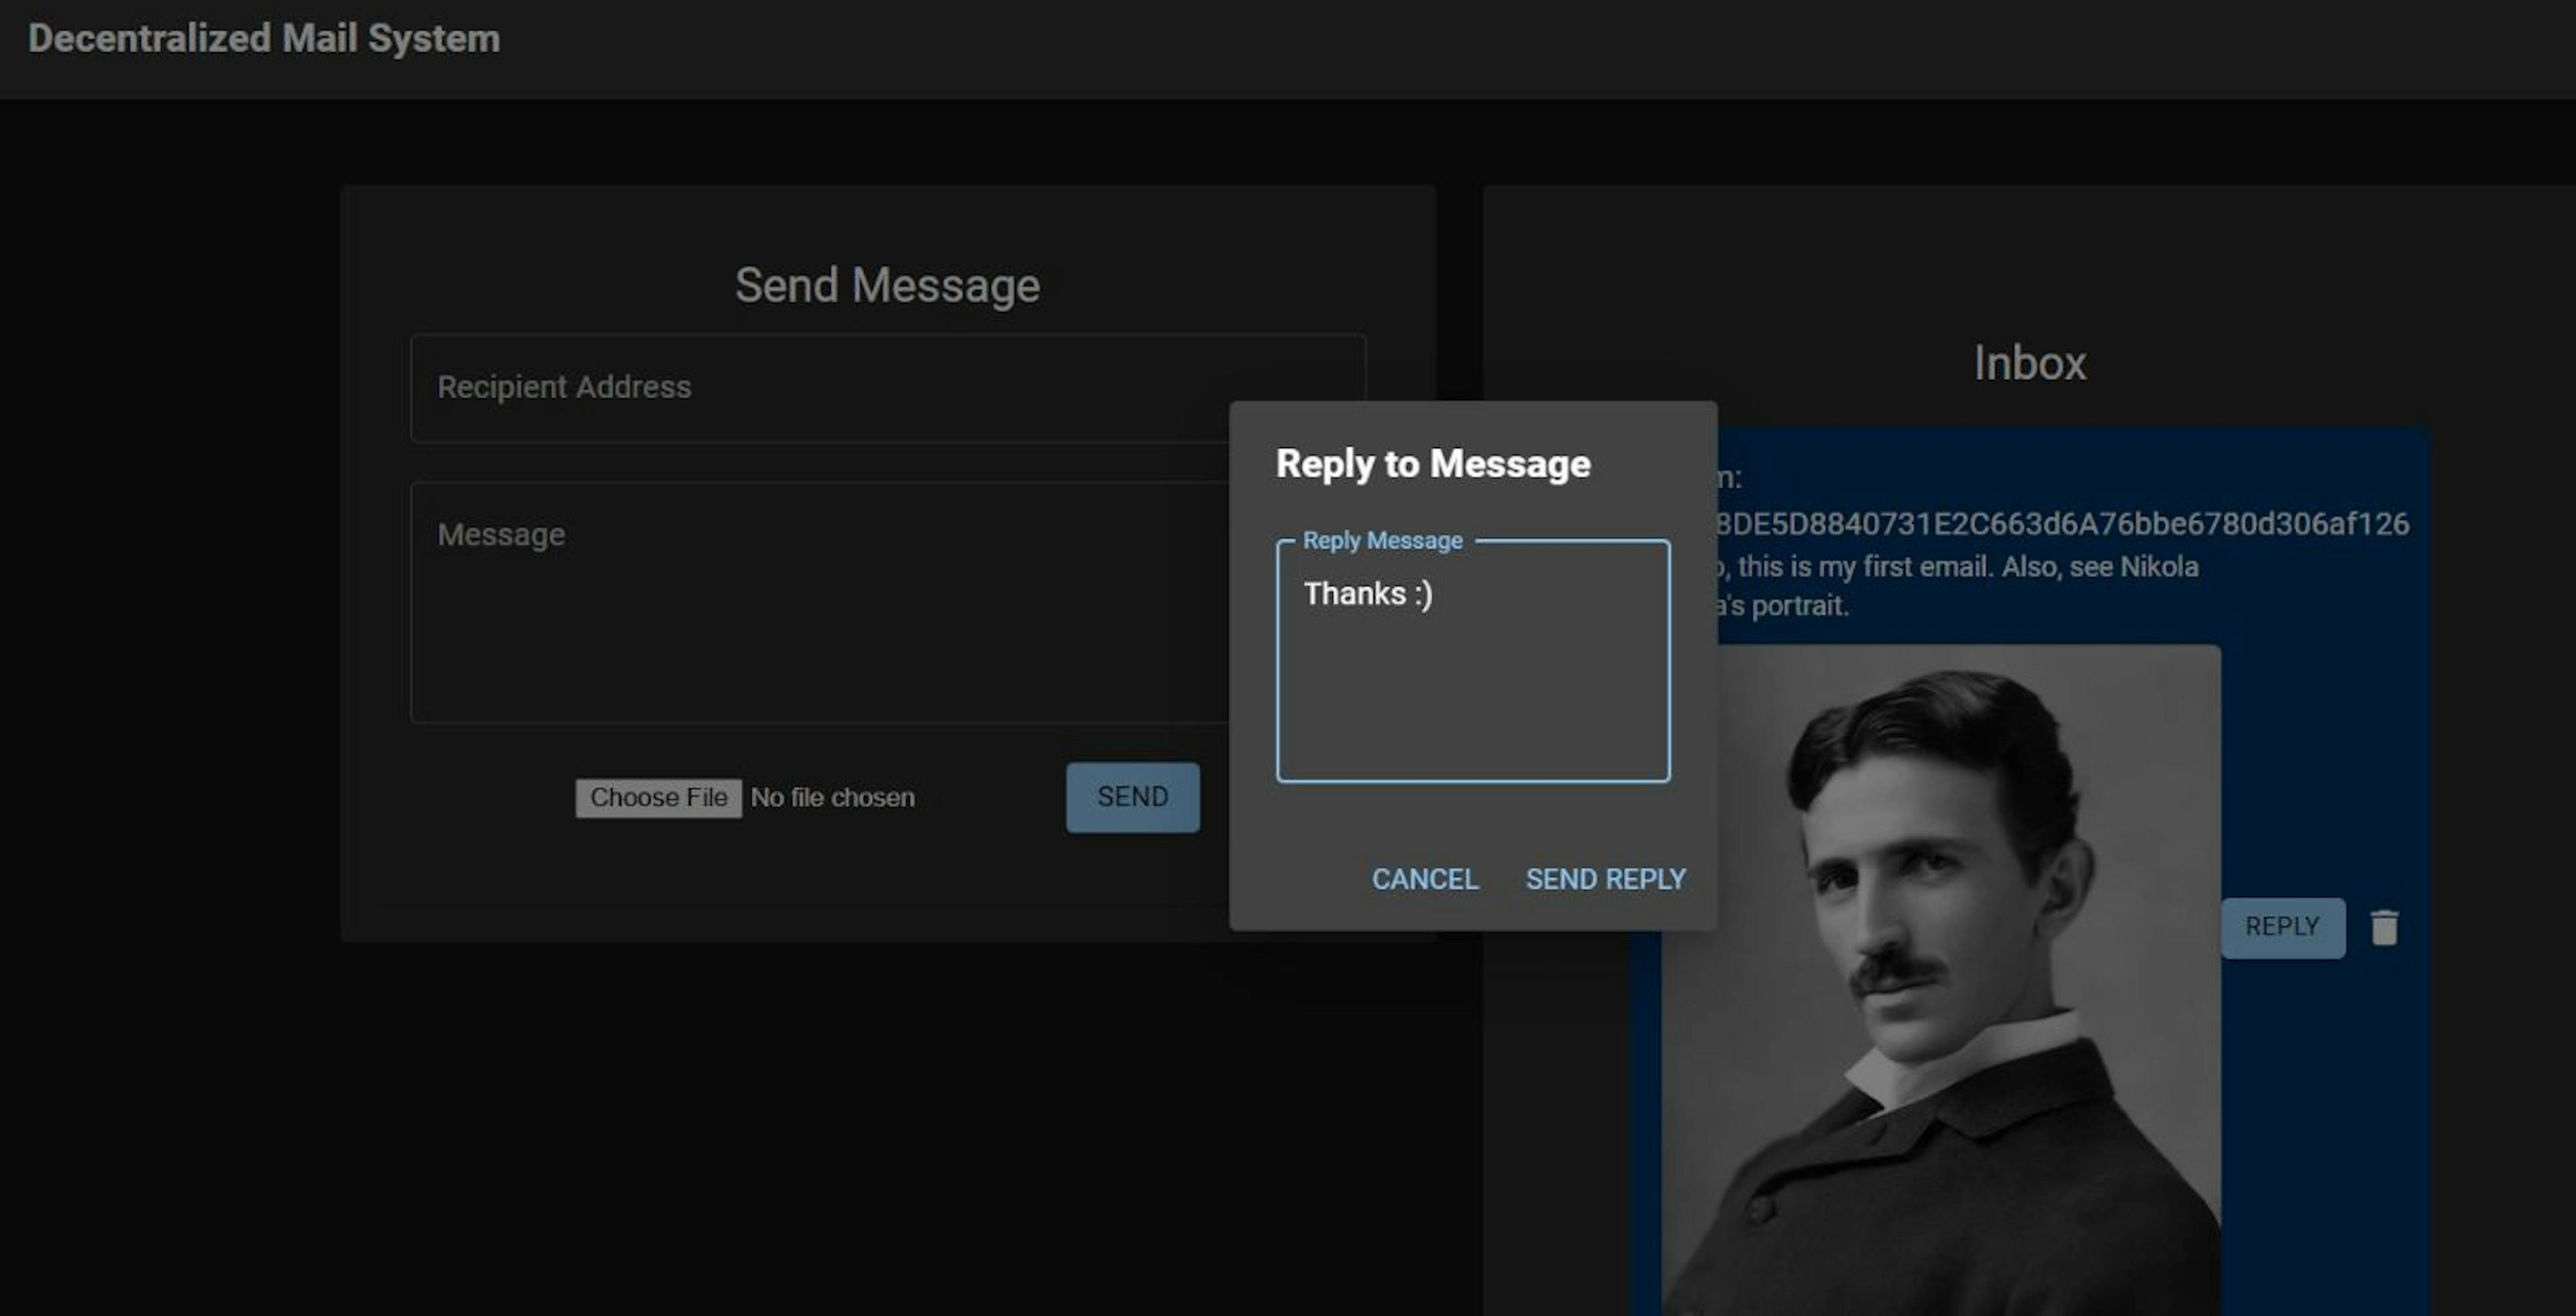 Figure 6: Testing the "Reply" feature, A box to type the text appeared